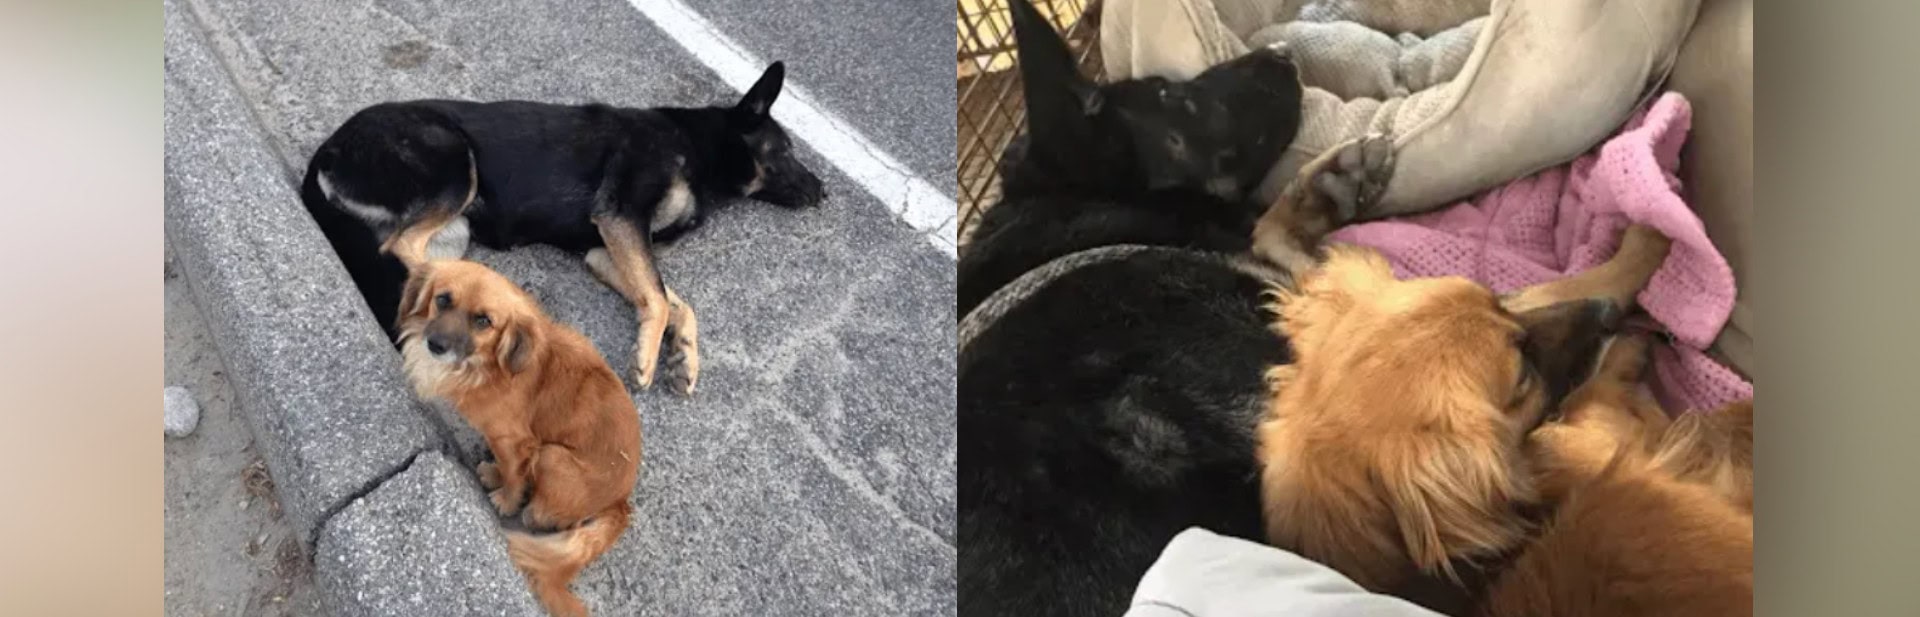 Stray Dog Stands Guard Over Injured Pregnant Companion Until Rescue Arrives